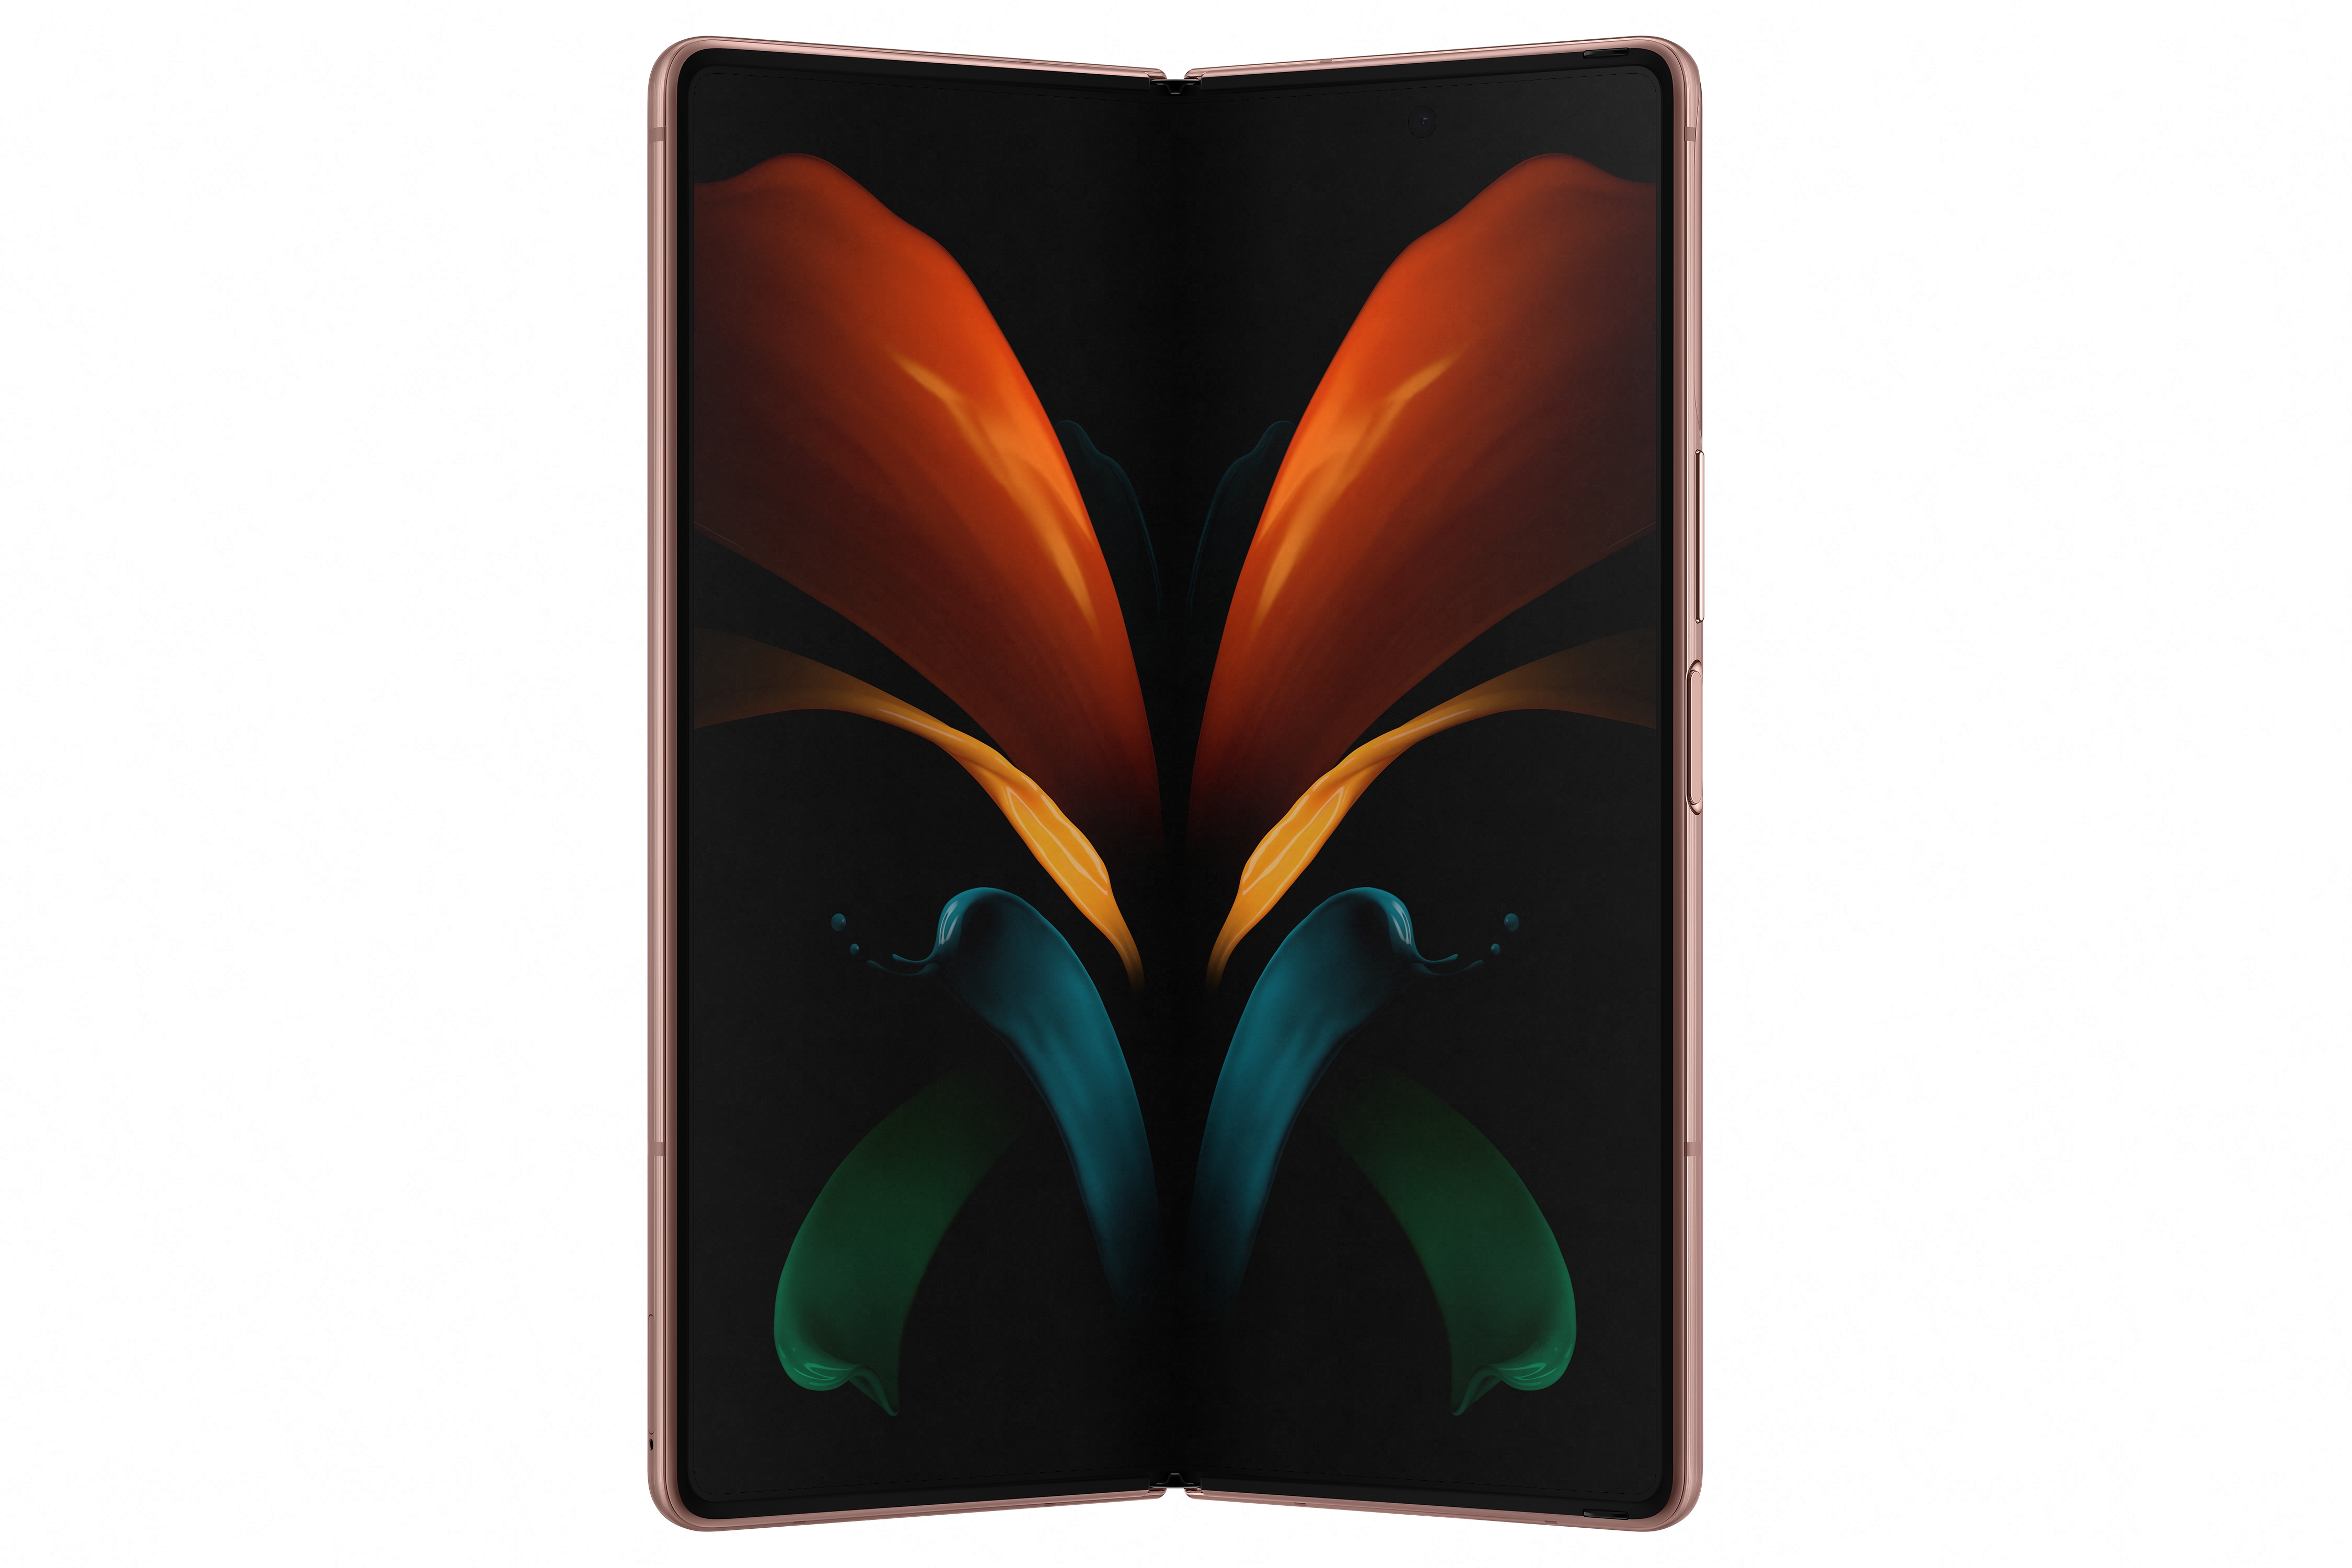 unfolding now: the galaxy z fold2 is available today